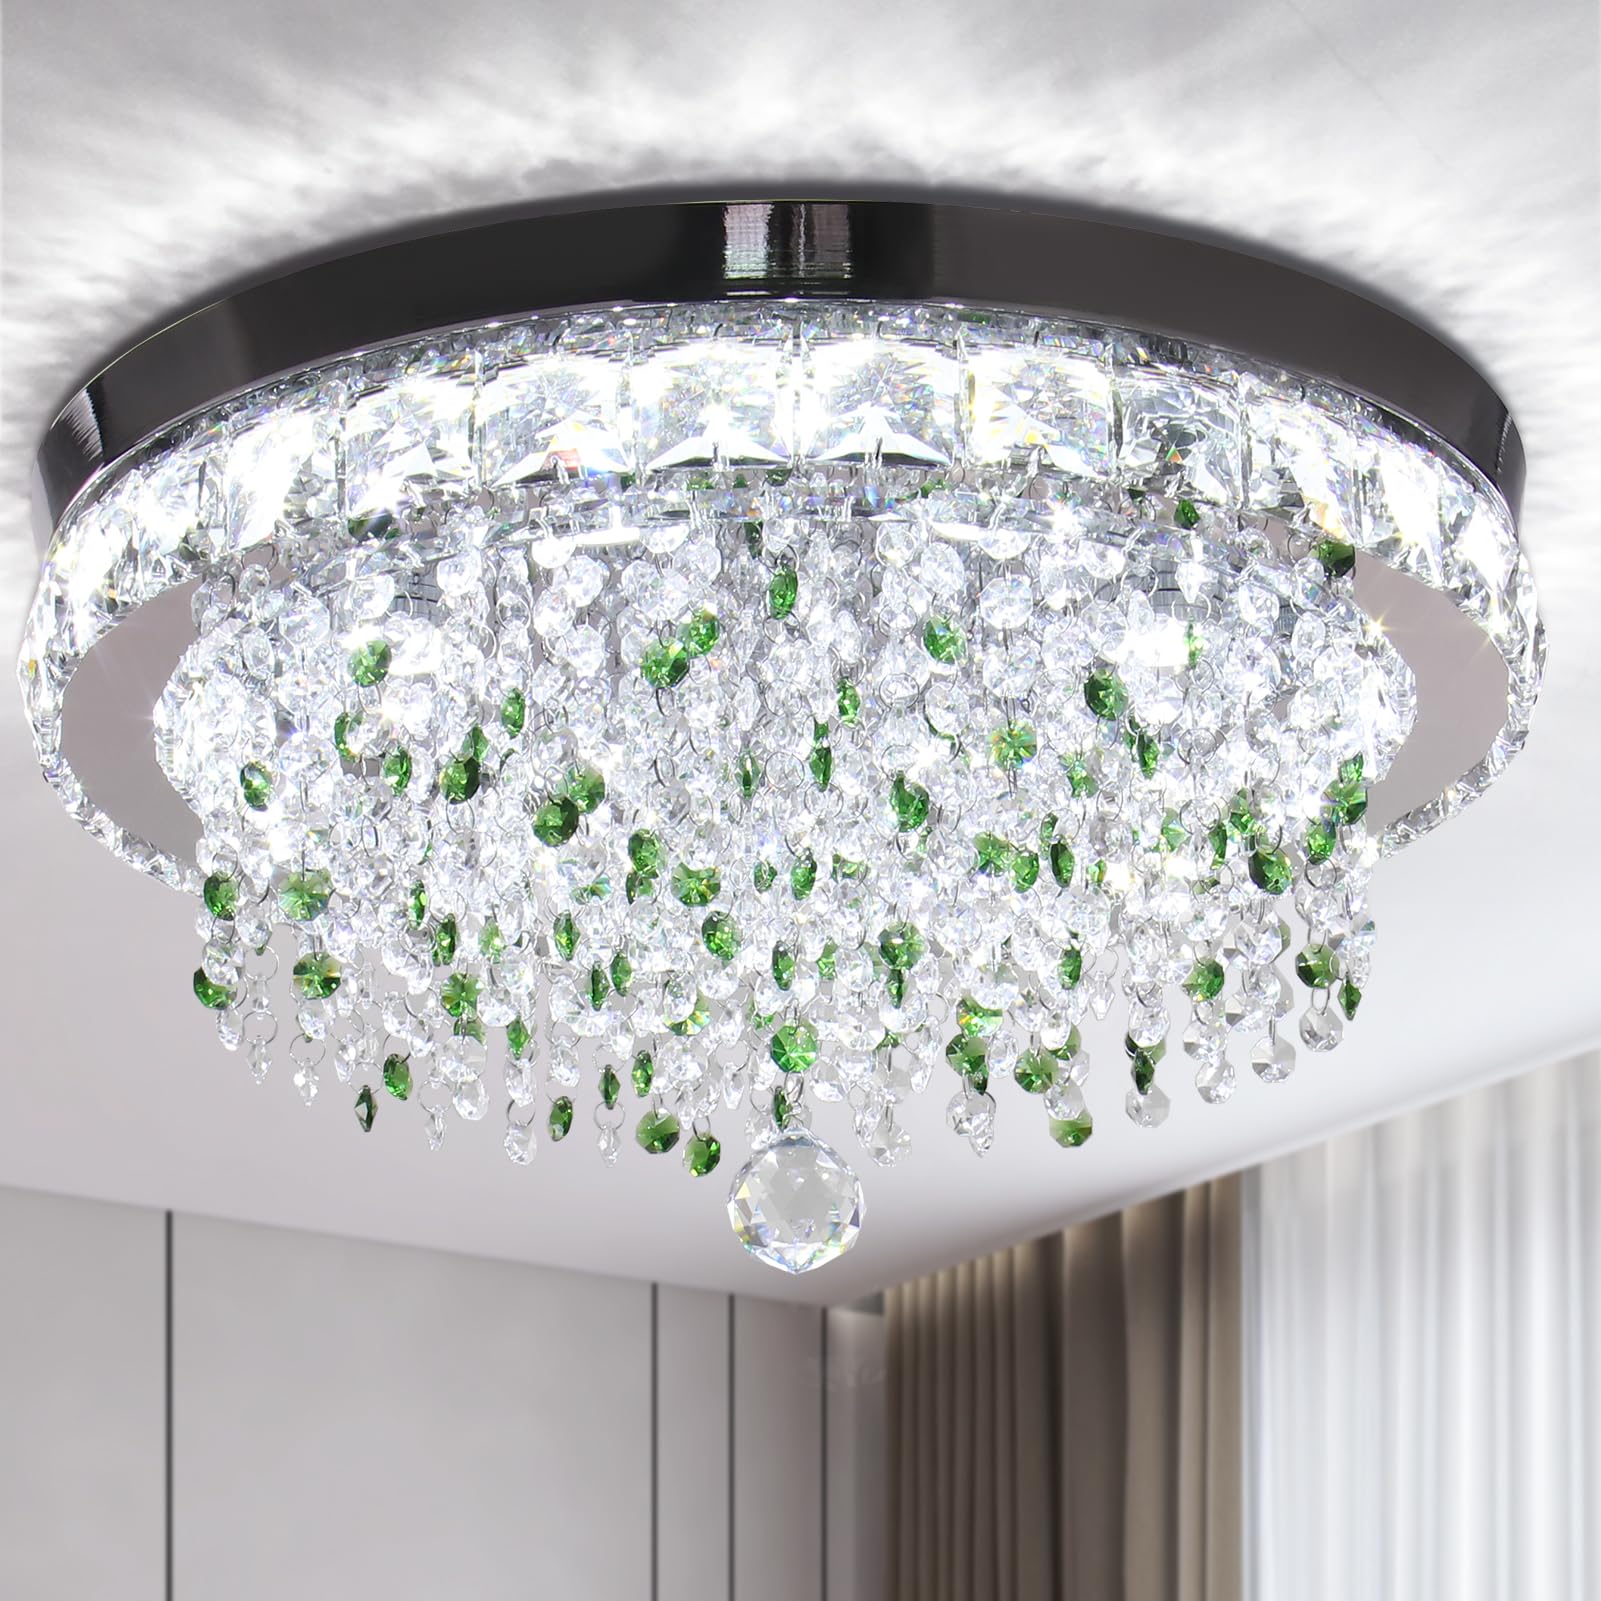 Finktonglan 18'' Crystal Chandelier Ceiling, Modern Chandeliers with Green Crystals, Brighting 6500K LED Crystal Ceiling Light Semi Flush Mount Chandeliers for Bedrooms Living Room Dining Room